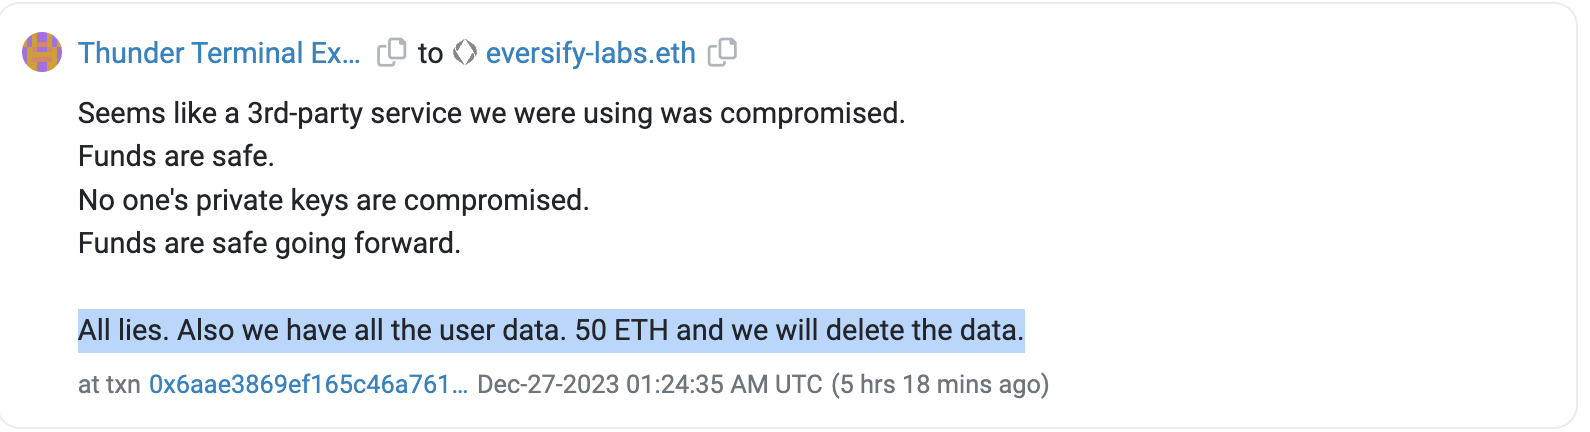 Thunder Terminal Hackers On-Chain Message. Source: Etherscan